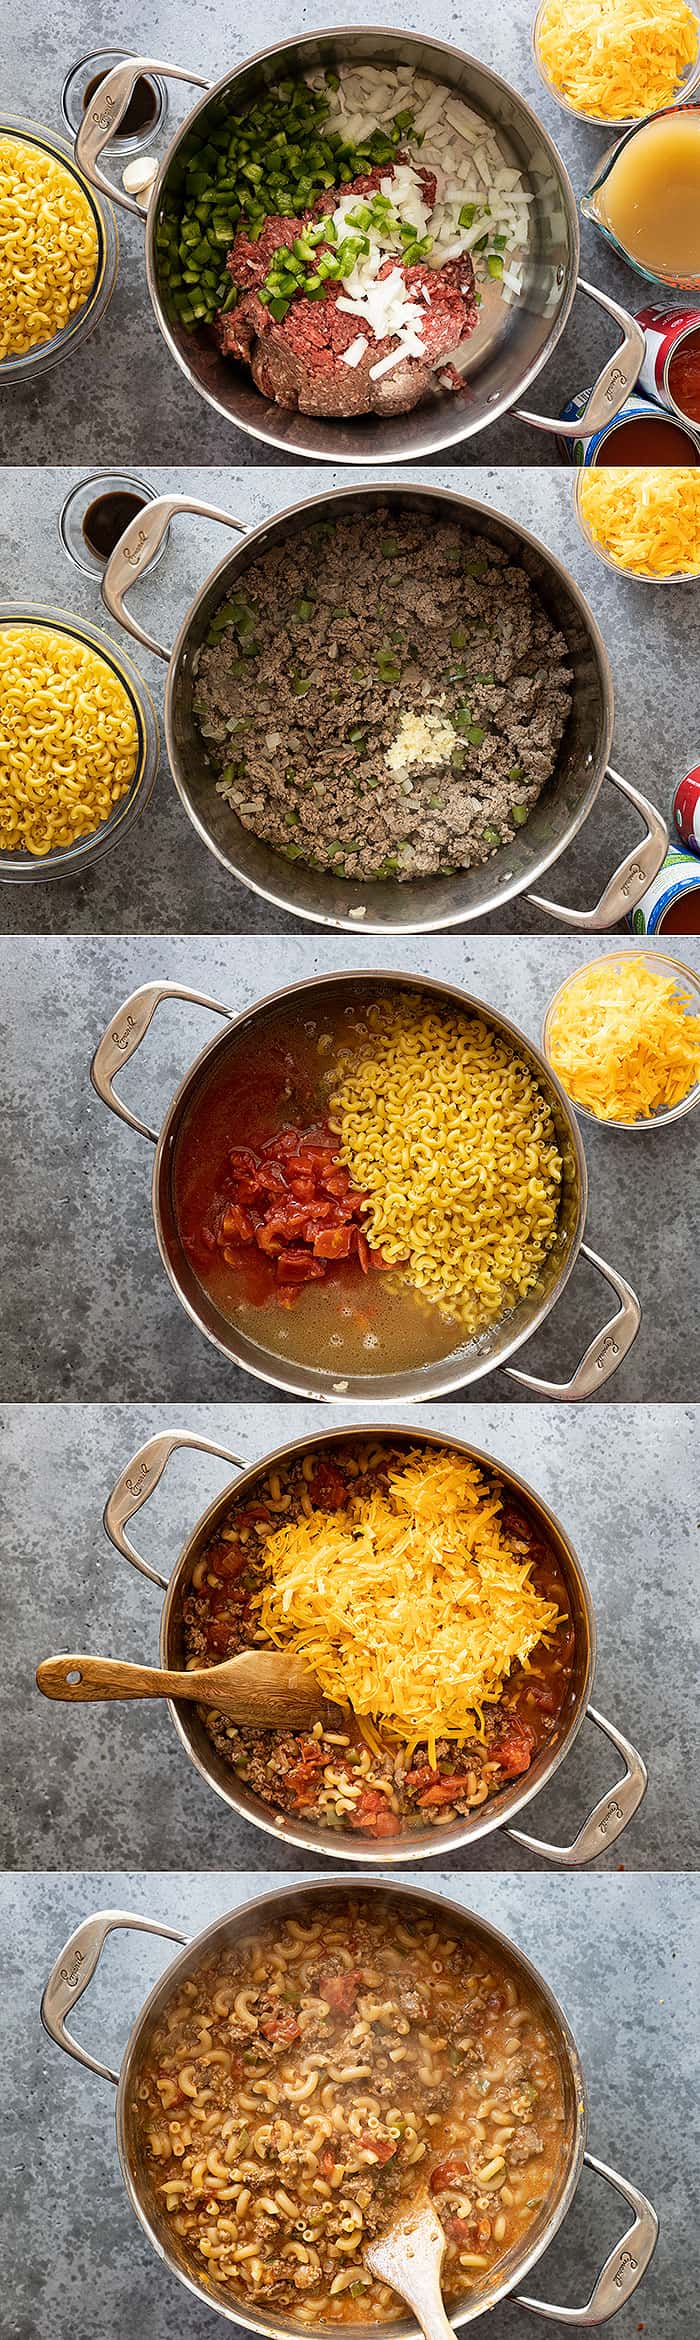 Five pictures showing the steps in making goulash. Browning the meat and veggies, adding the rest (except the cheese) and cooking until the pasta is tender. 